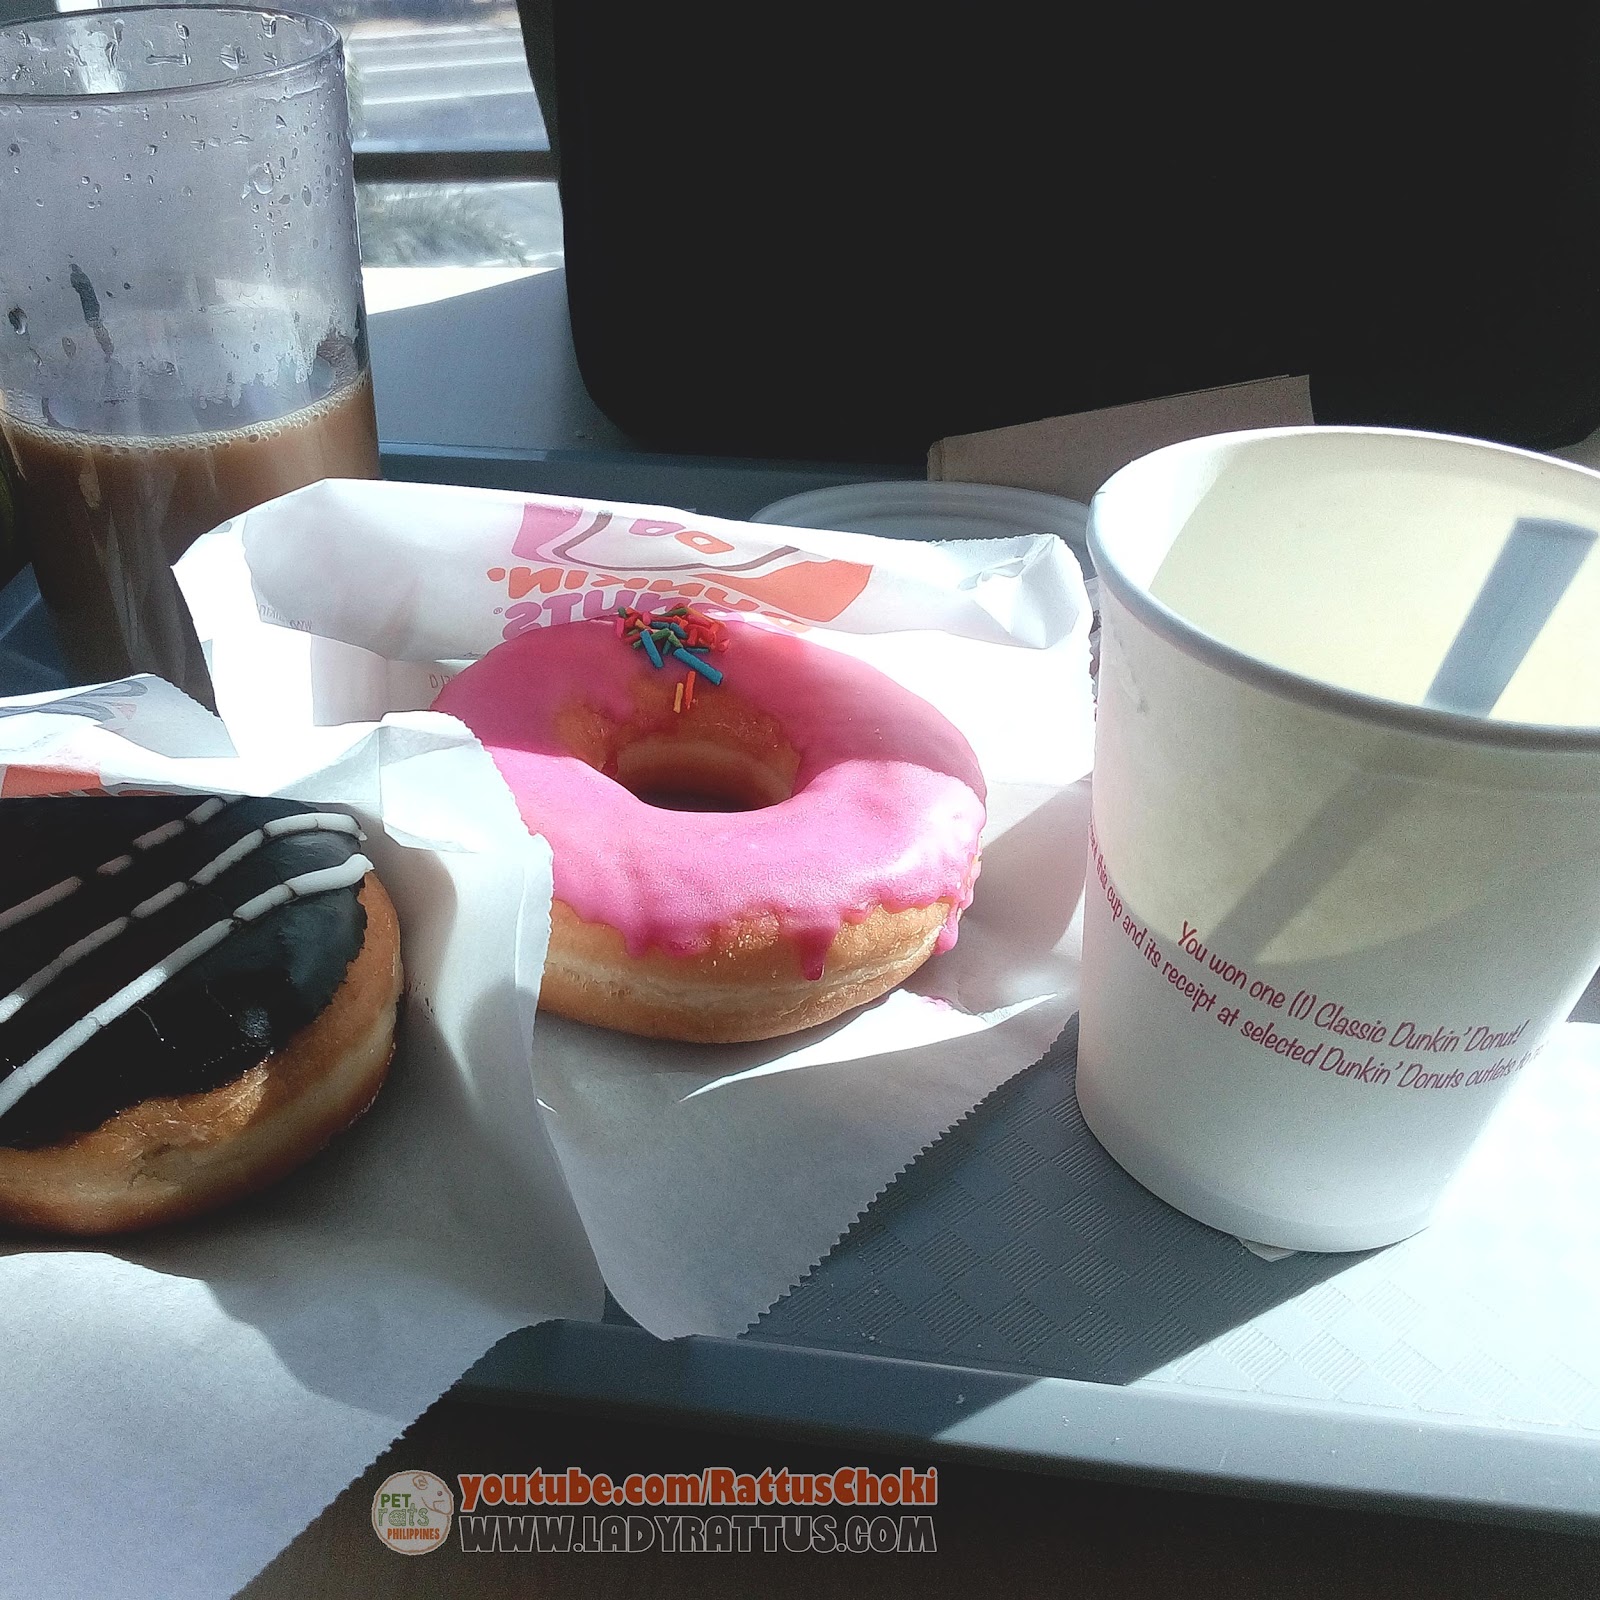 Free donuts with Dunkin Donuts' Coffee Combo